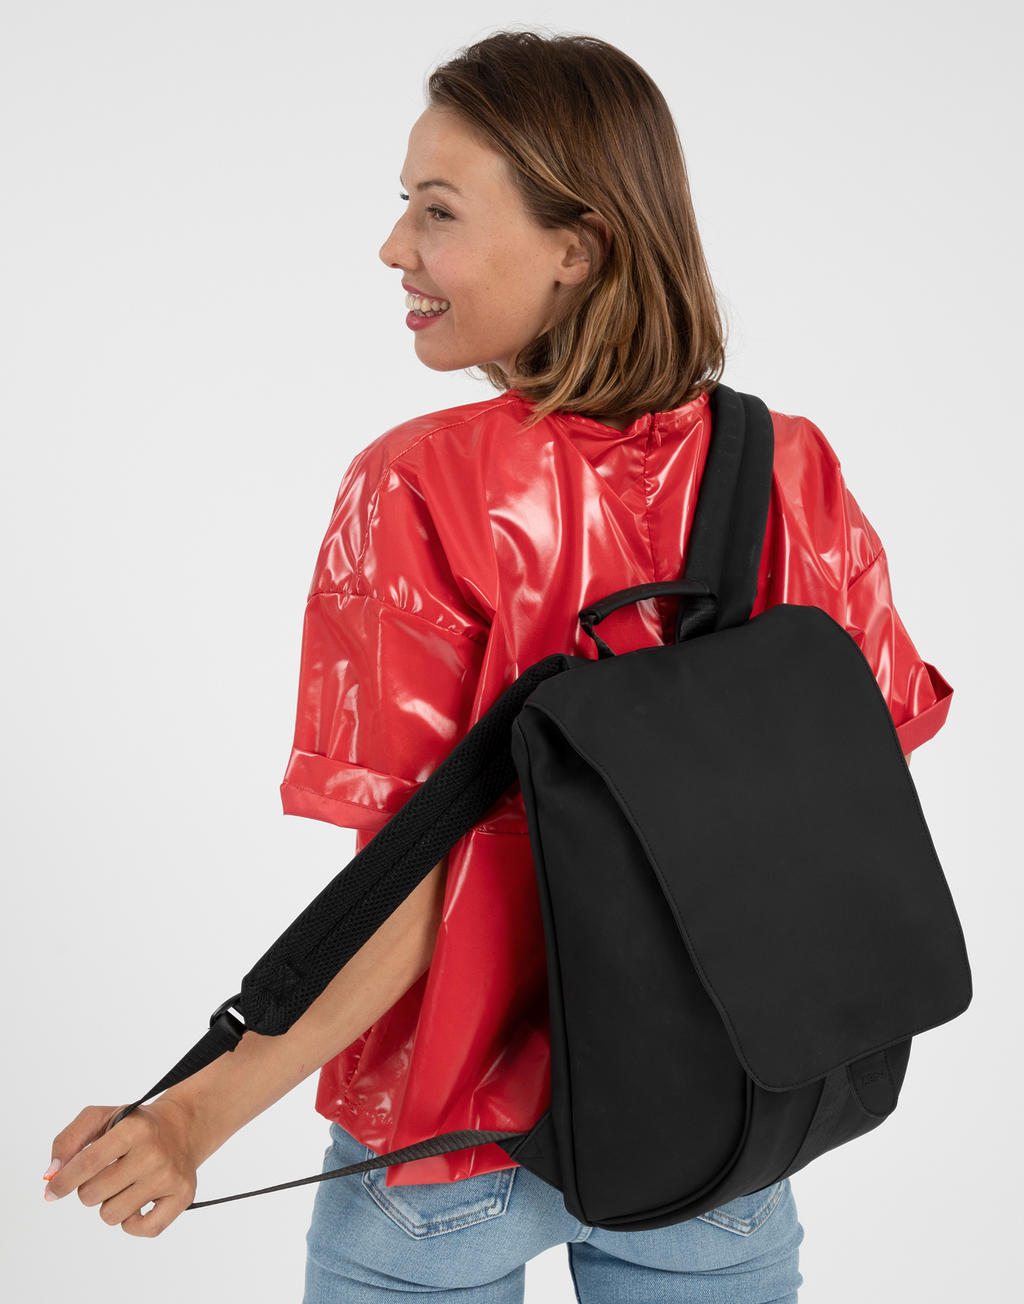 Amber Chic Laptop Backpack